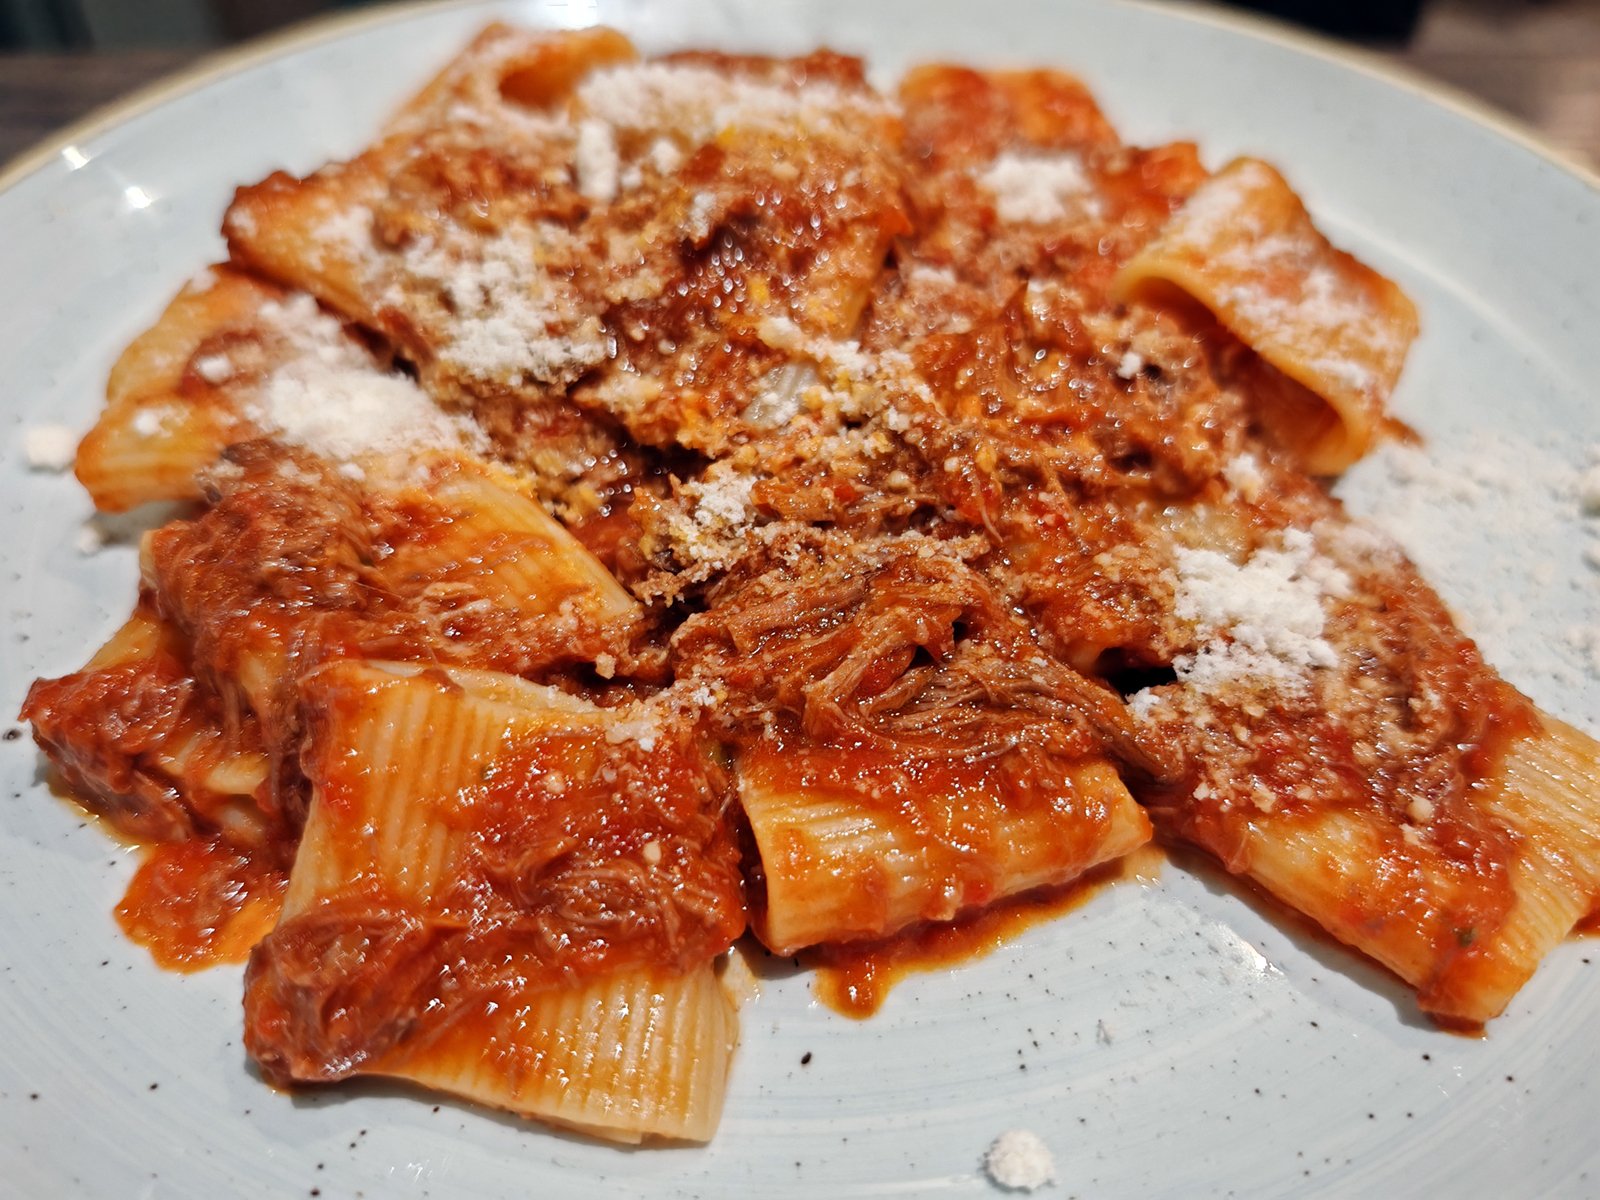 A plate of rigatoni pasta with a rich tomato sauce and shredded meat, topped with a generous sprinkling of grated parmesan cheese.